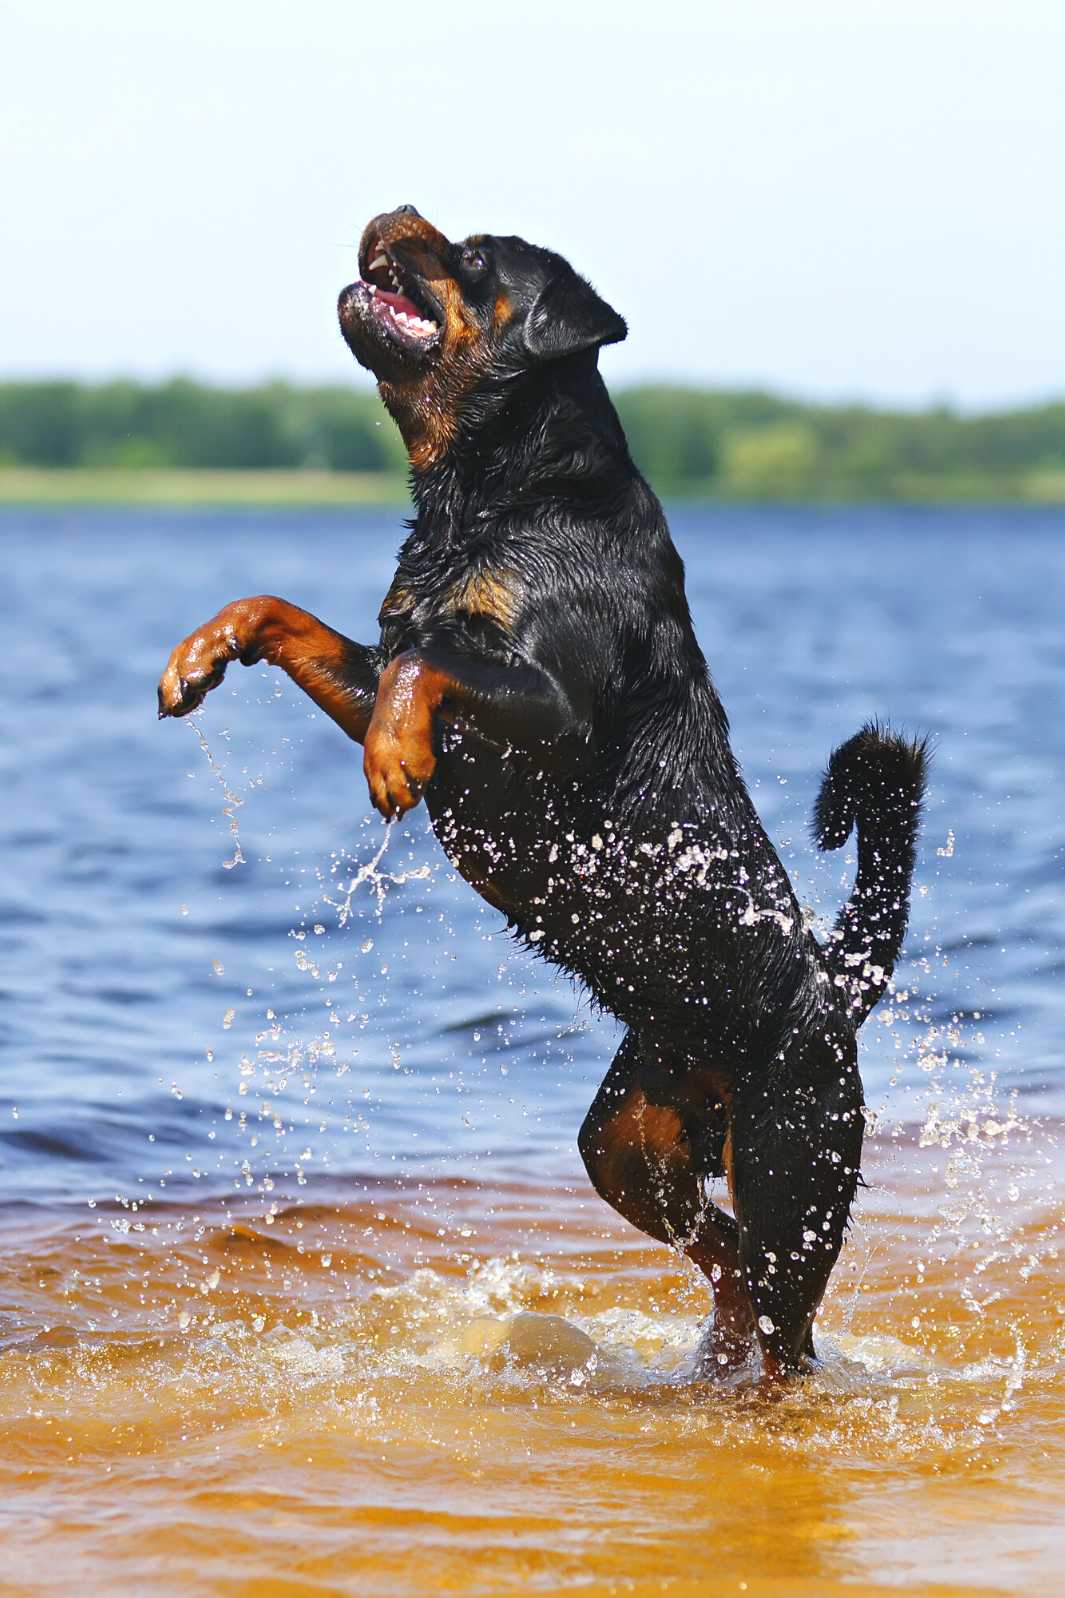 Adorable Rottweiler frolicking in the water at the beach on summer vacation.